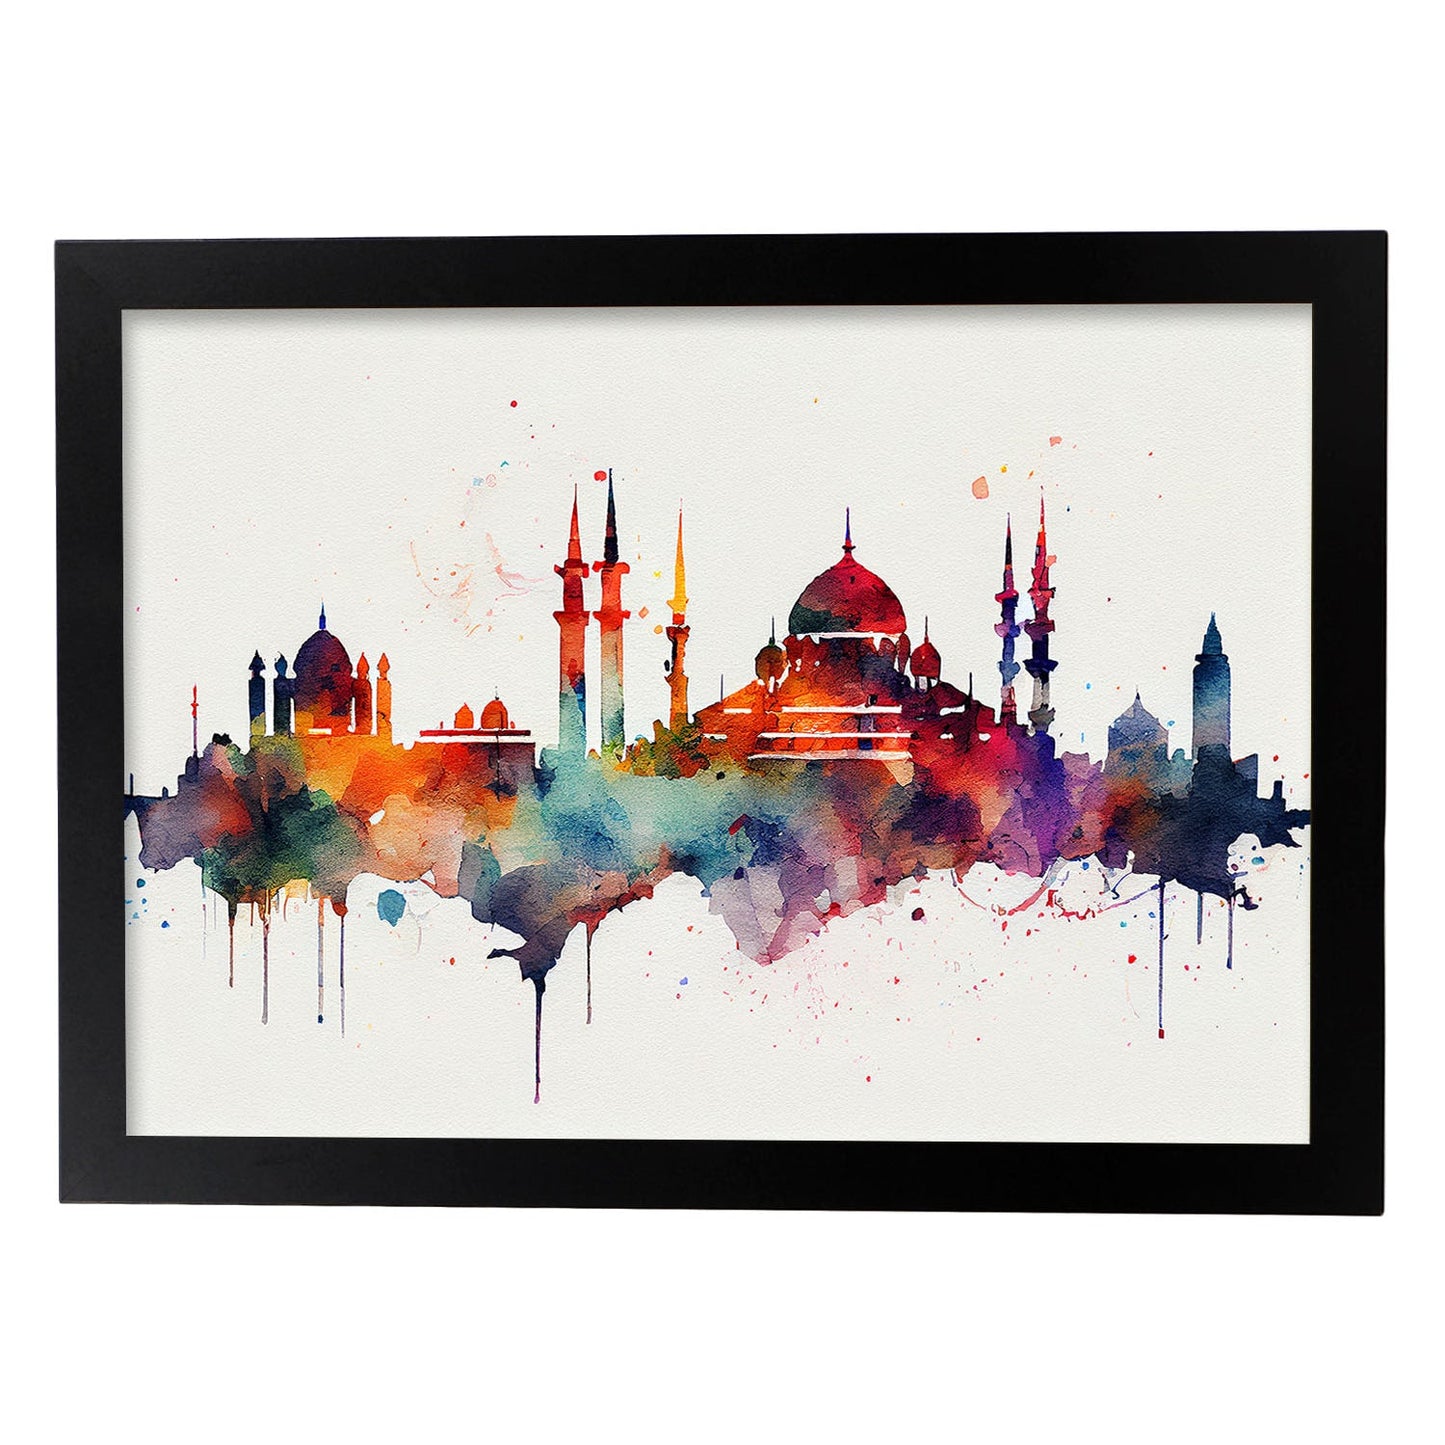 Nacnic watercolor of a skyline of the city of Istanbul_4. Aesthetic Wall Art Prints for Bedroom or Living Room Design.